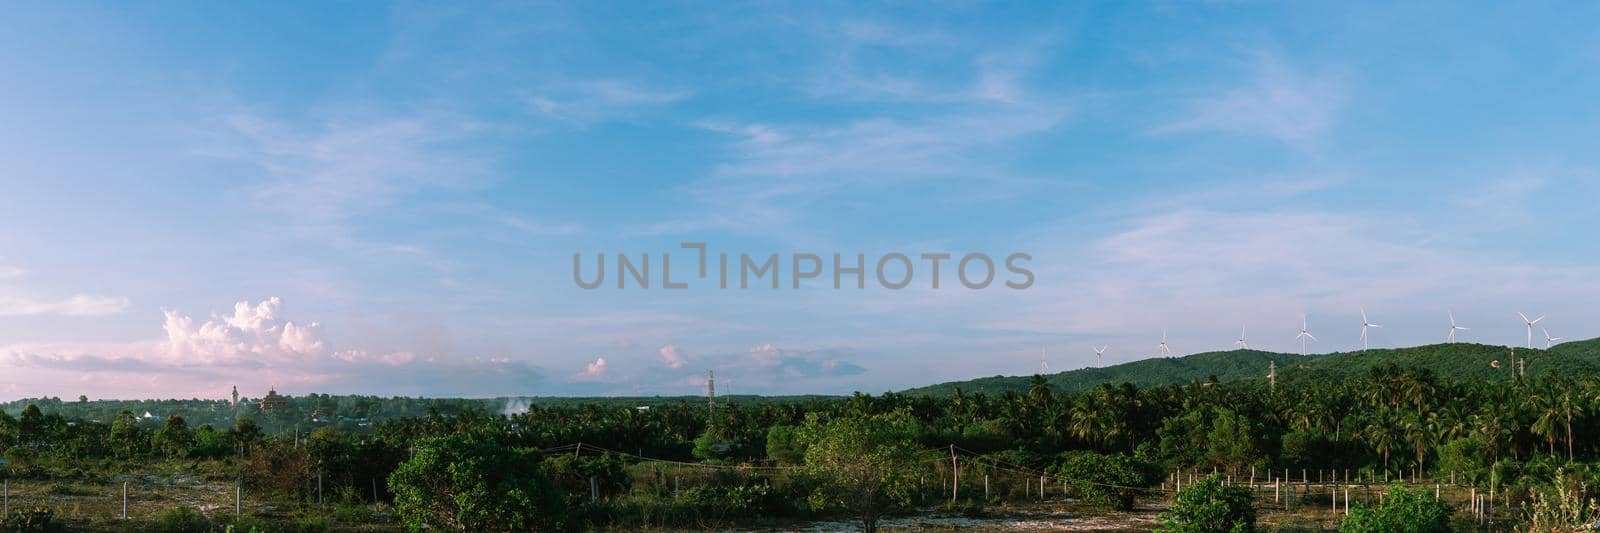 BANNER long format crop it, panorama summer landscape clouds buddhist temple statue windmills blue Sky Meditation background by nandrey85